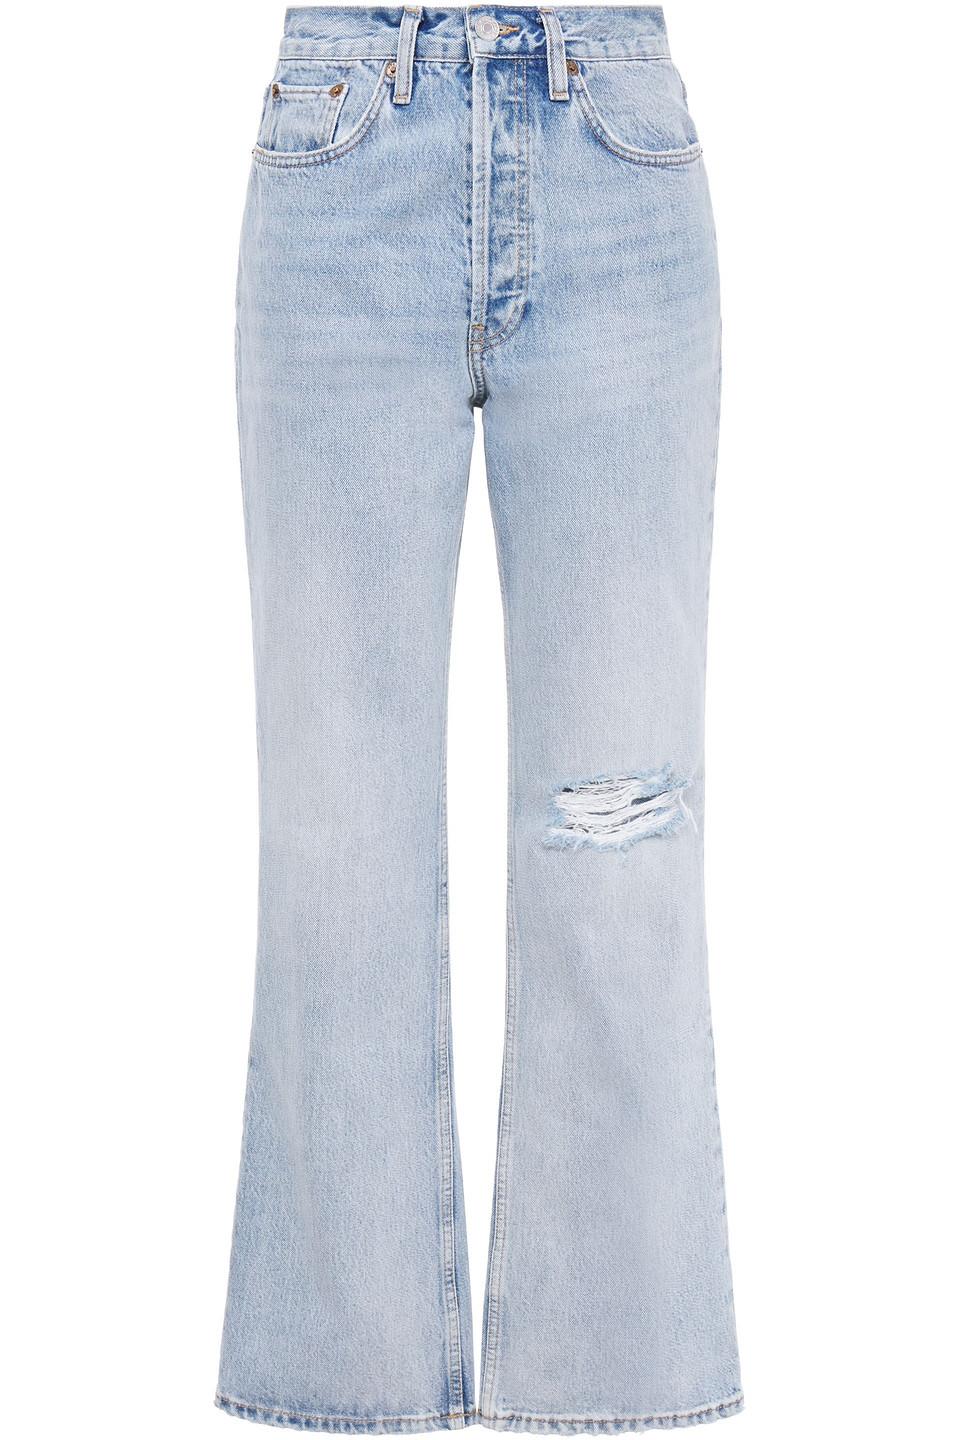 RE/DONE Originals 70s Distressed High-rise Bootcut Jeans in Blue | Lyst